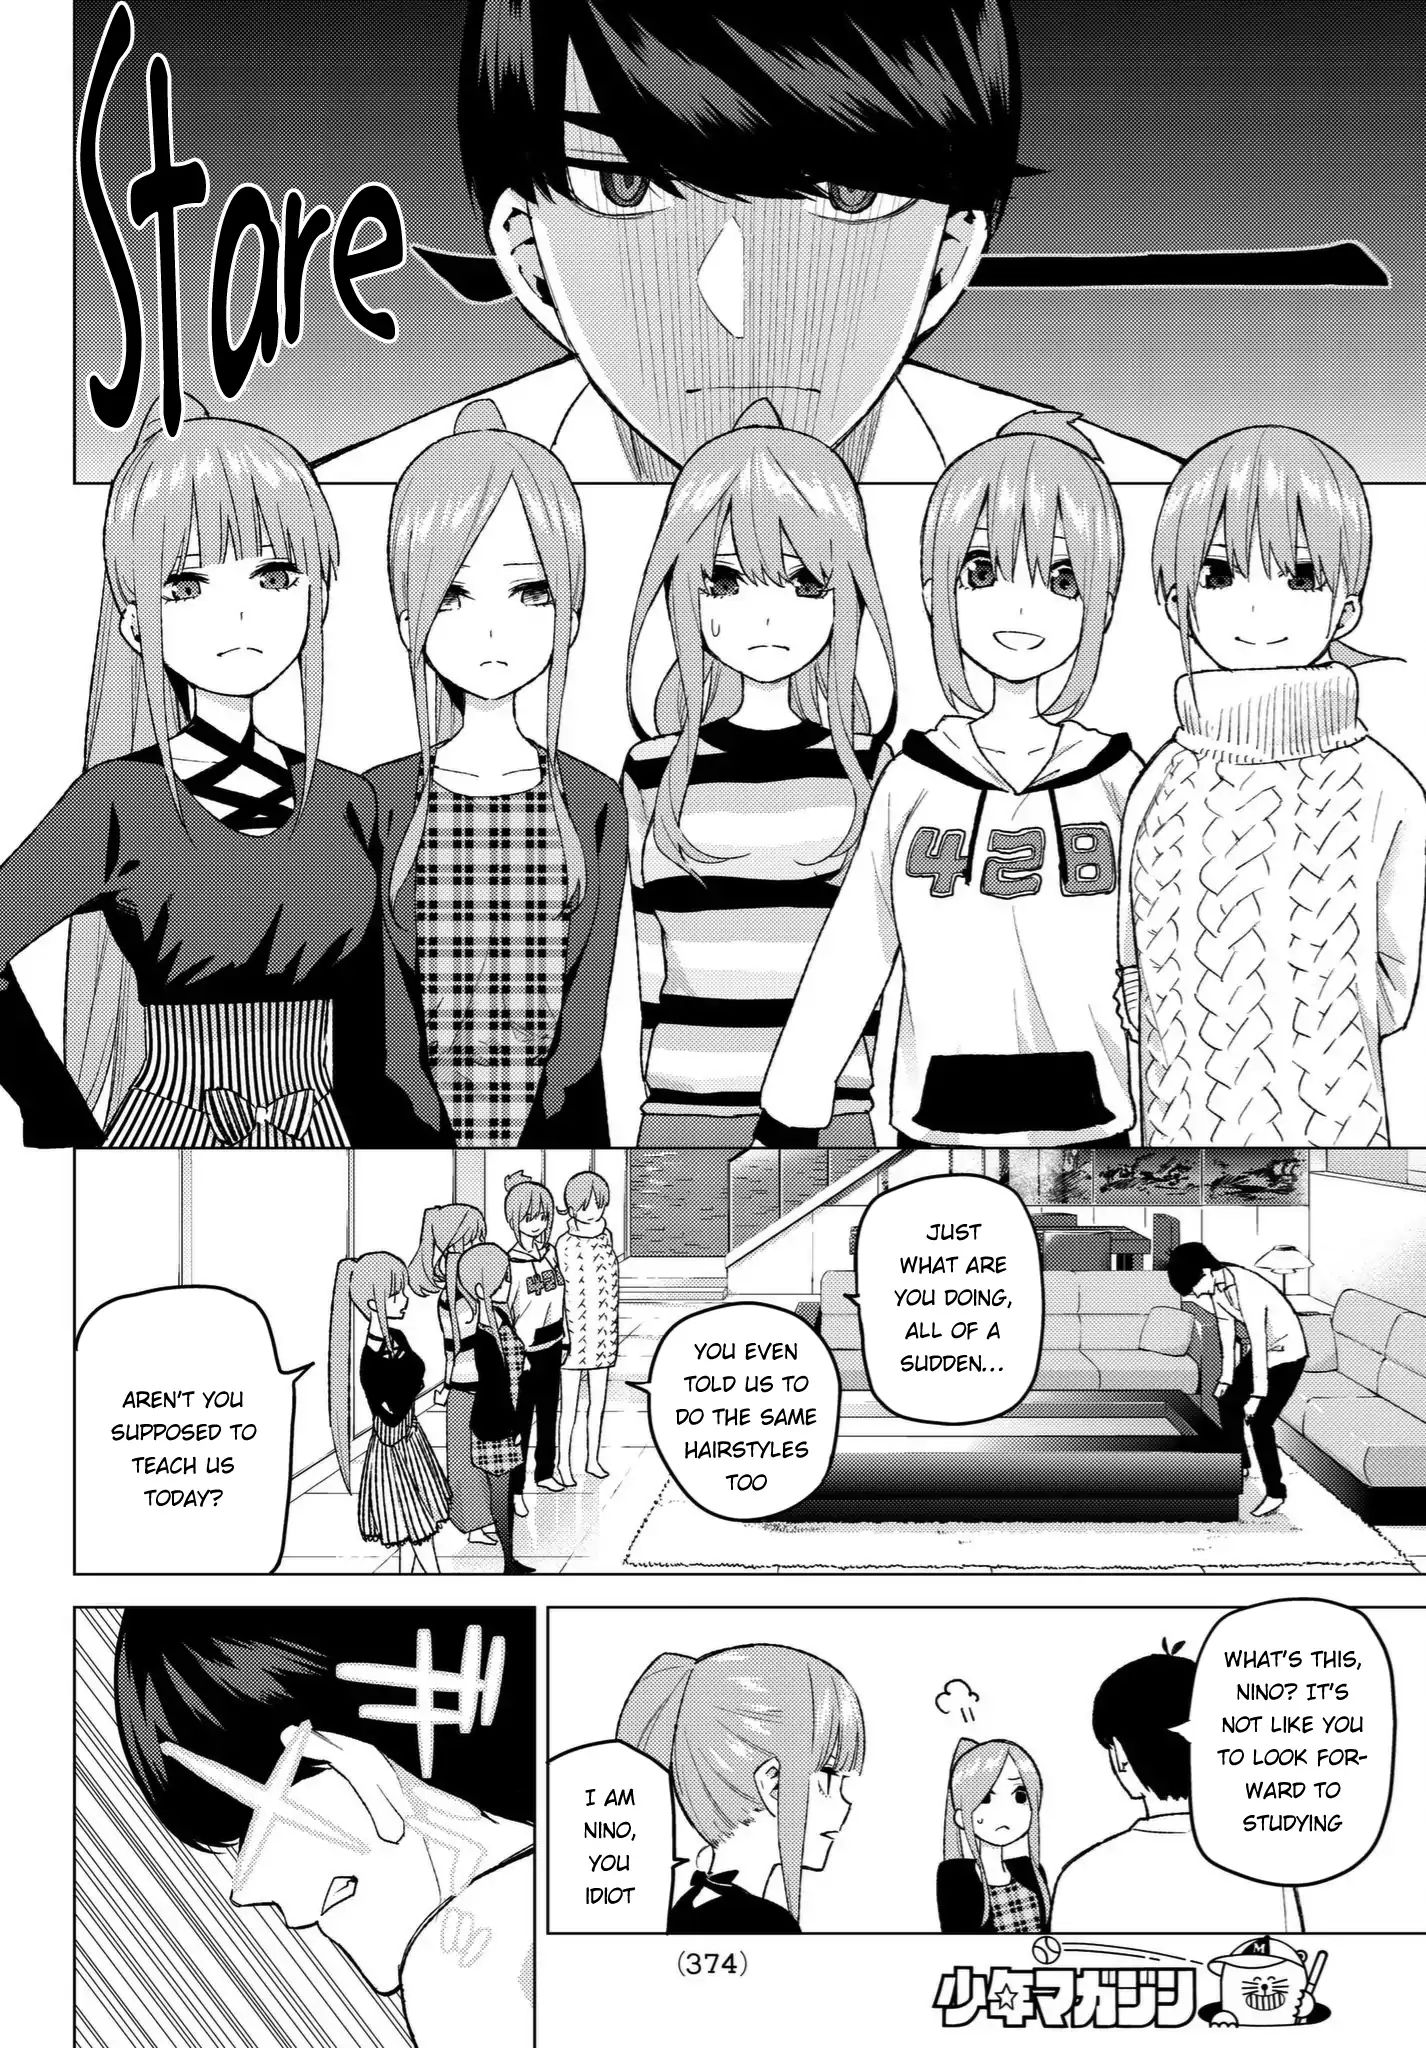 Go-Toubun No Hanayome Vol.5 Chapter 35: Detective Fuutarou And The 5 Suspects - Picture 3